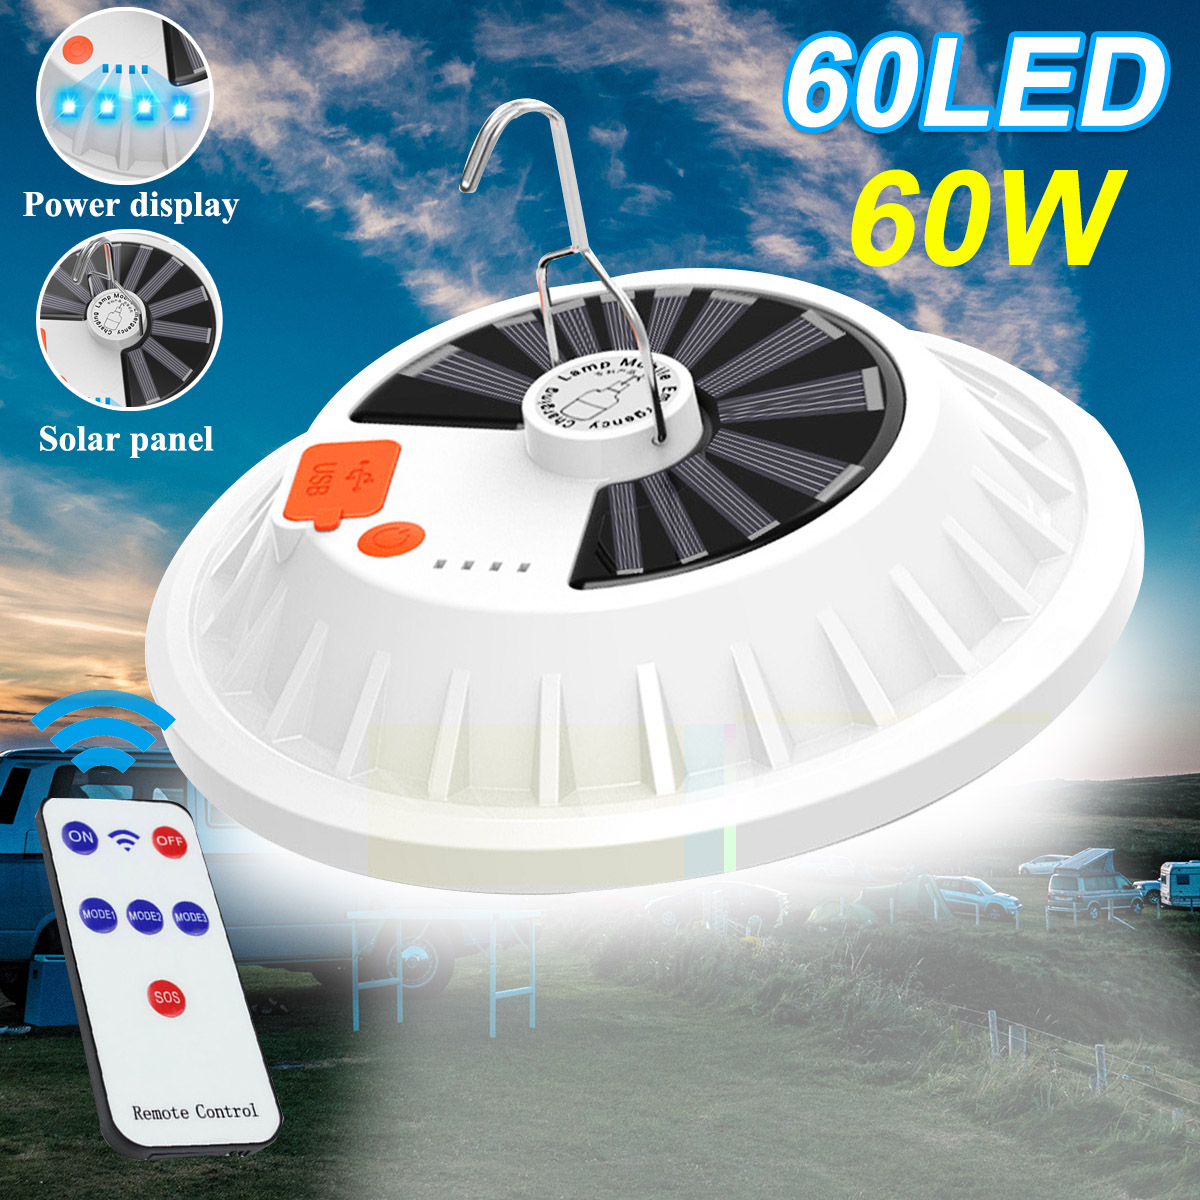 60W-Solar-LED-Lamp-USB-Rechargeable-Outdoor-Camping-Tent-Lantern-Portable-Emergency-Lighting-Night-M-1936009-1